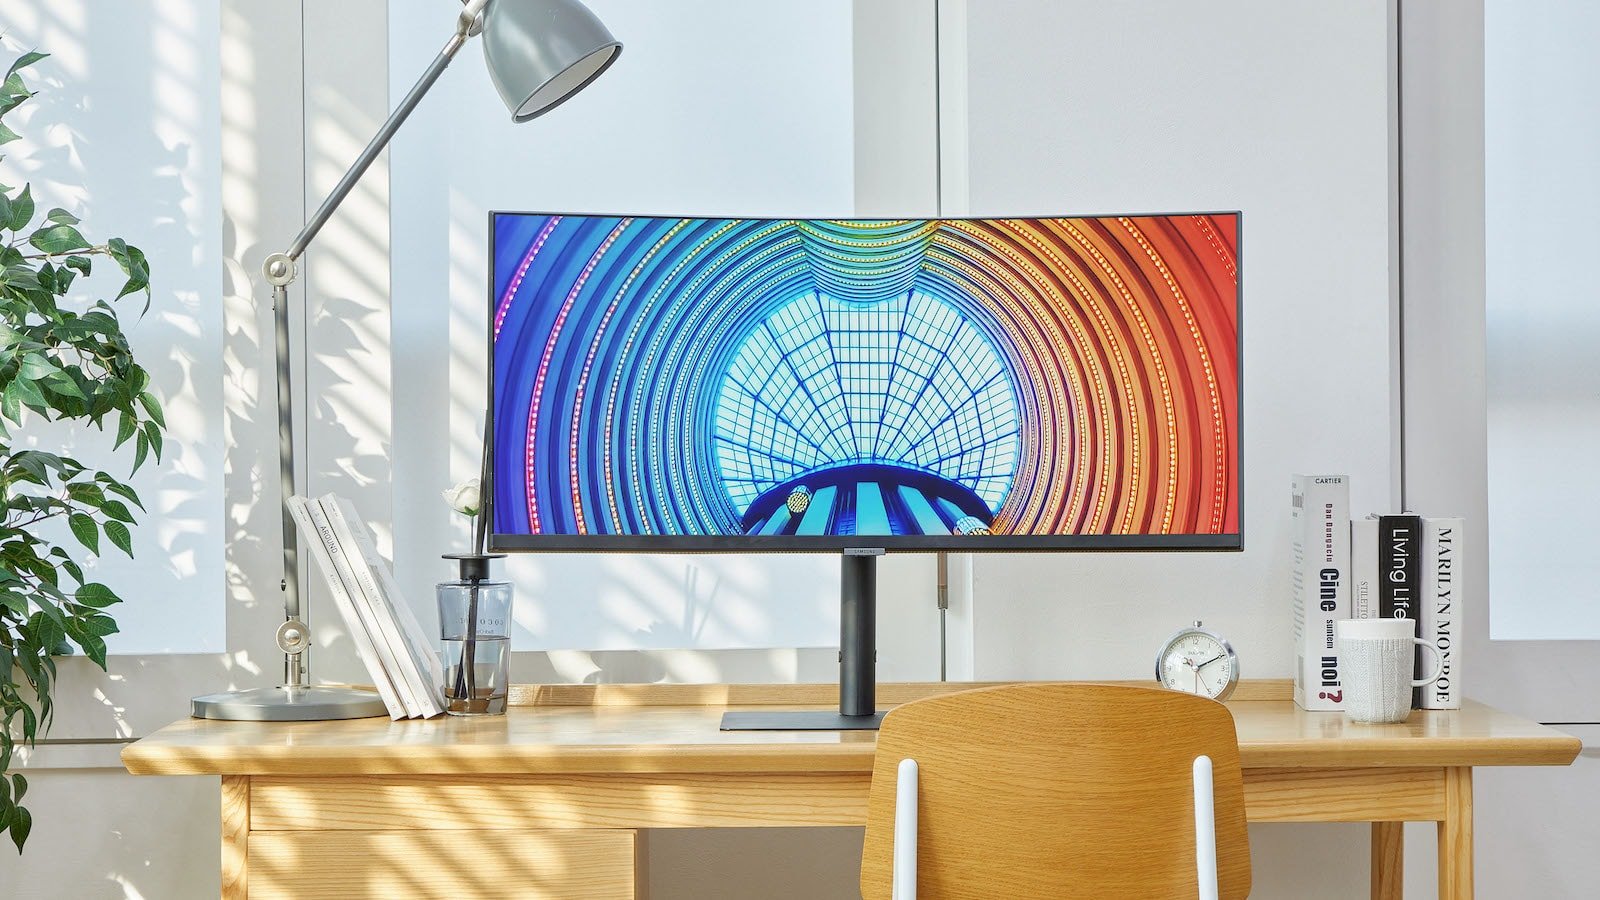 Samsung 2021 High-Resolution Monitors include three series: S8, S7, and S6